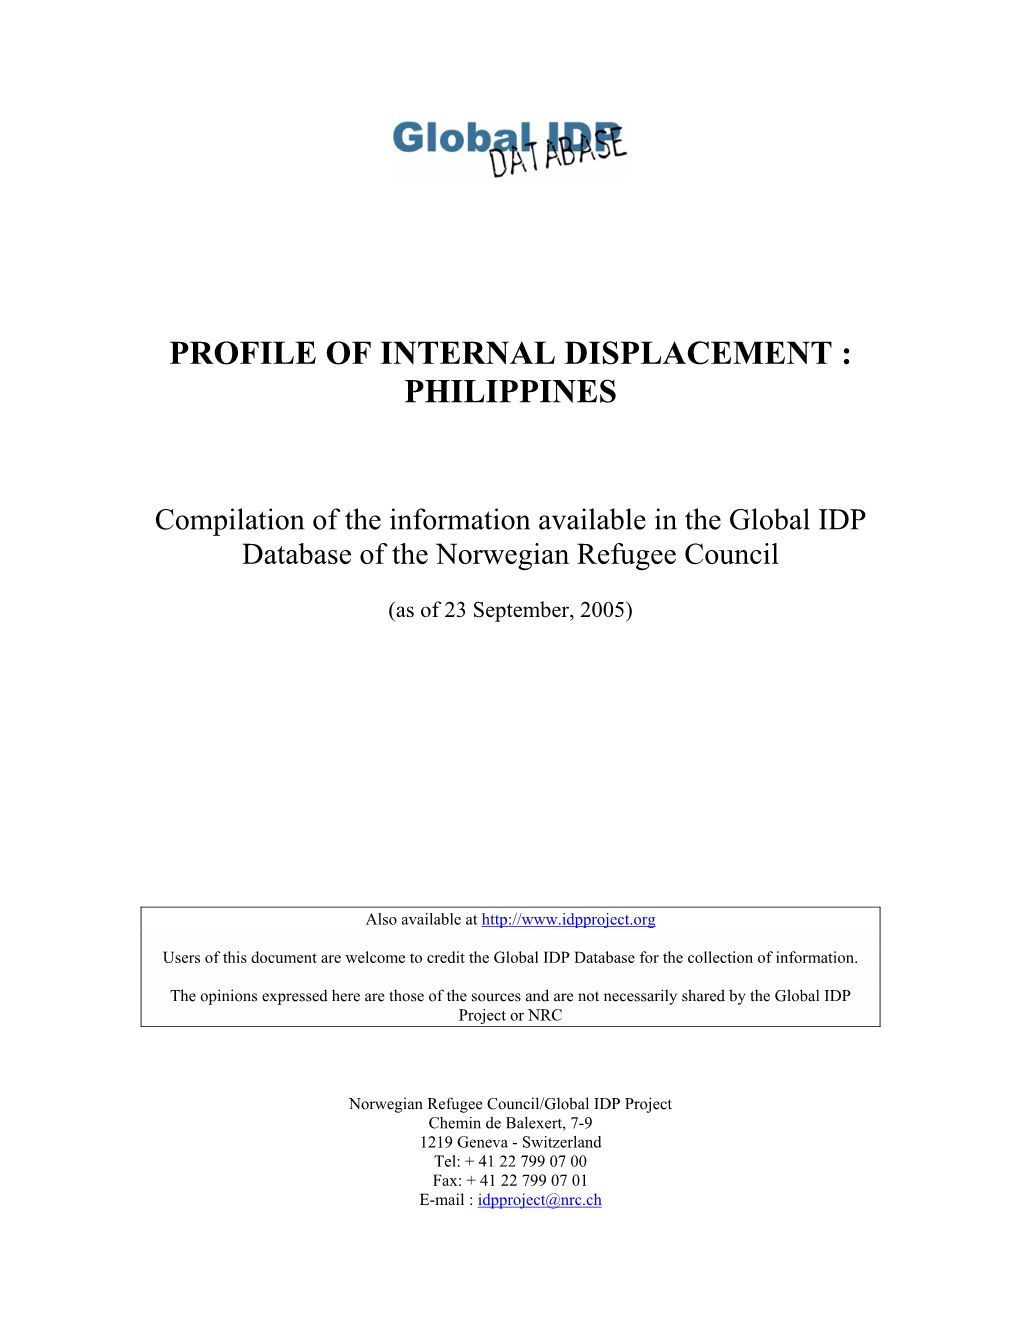 Profile of Internal Displacement : Philippines